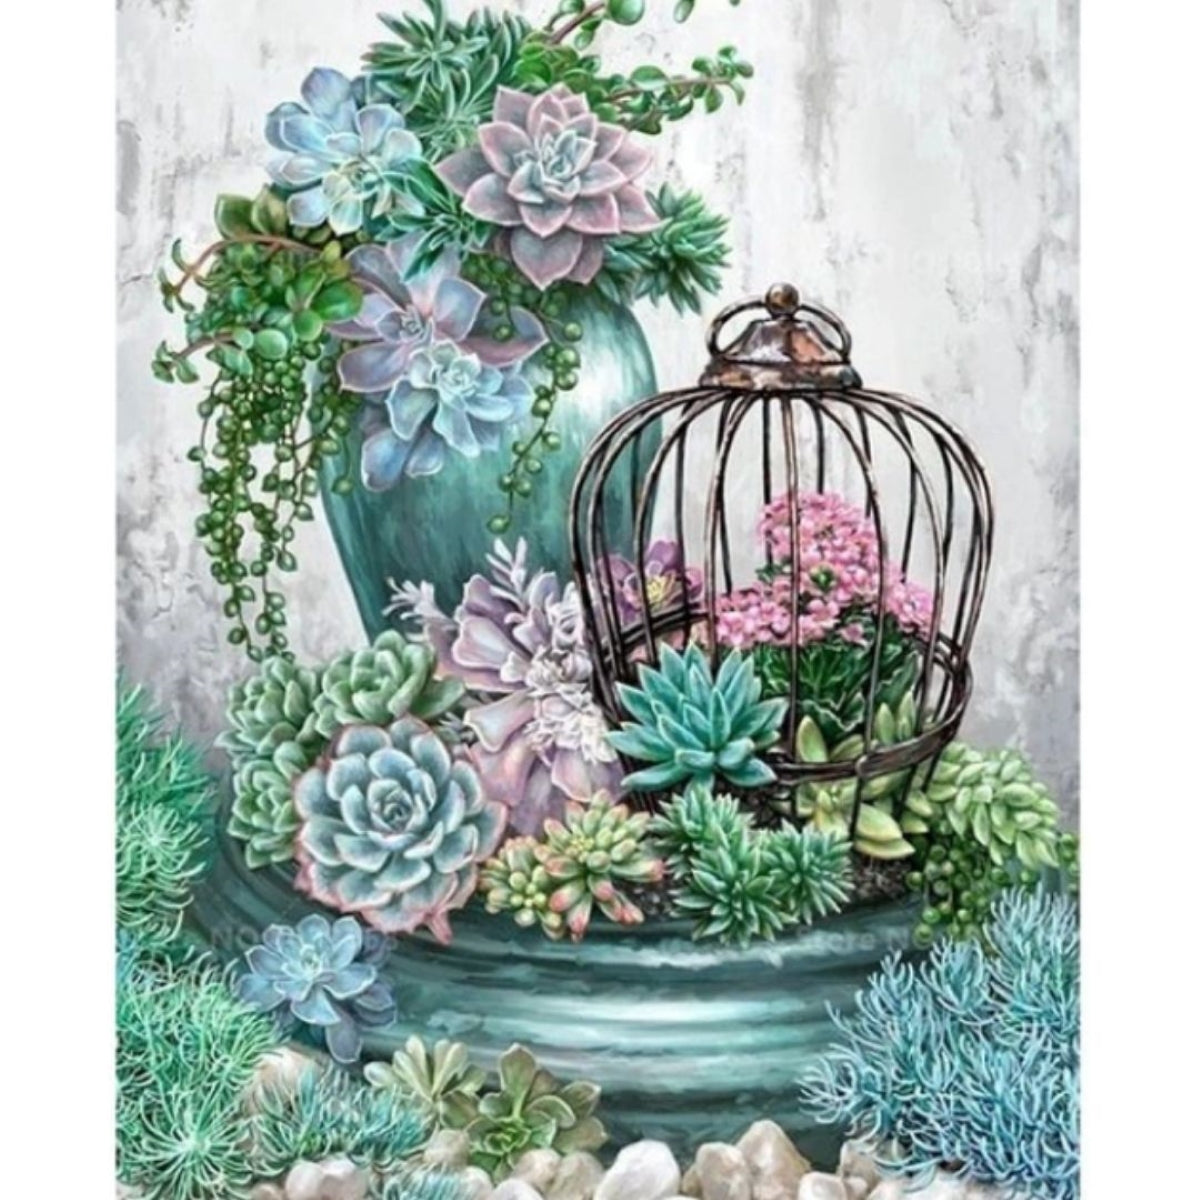 Painting By Numbers Kit - Succulent Pot